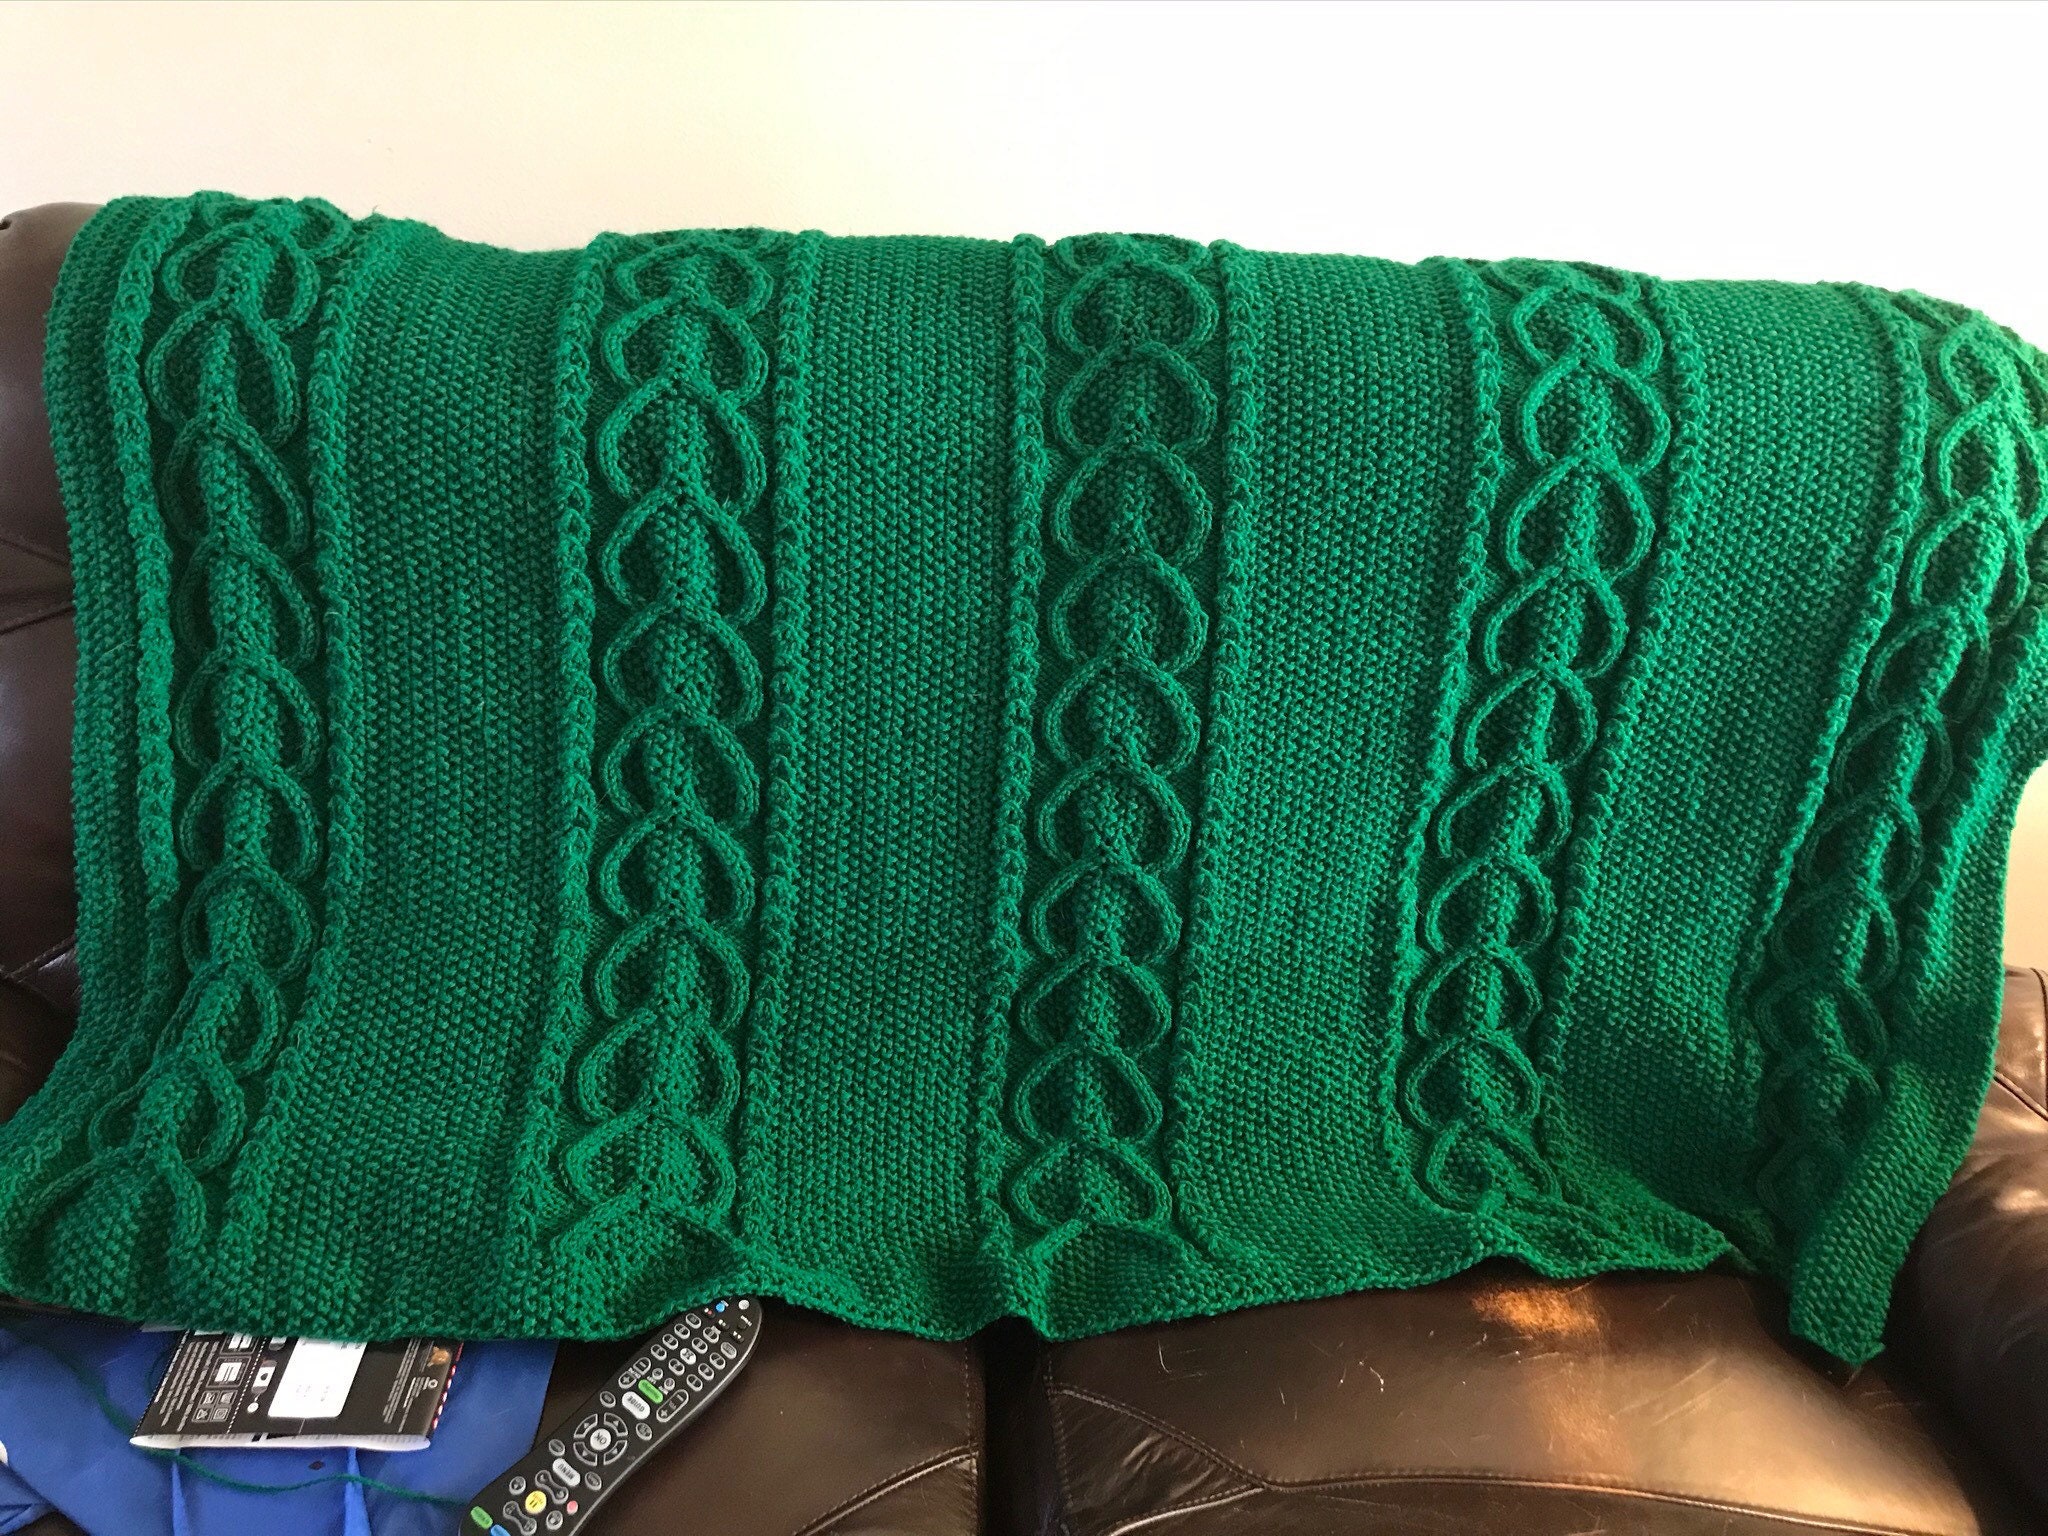 Green cable knitted blanket